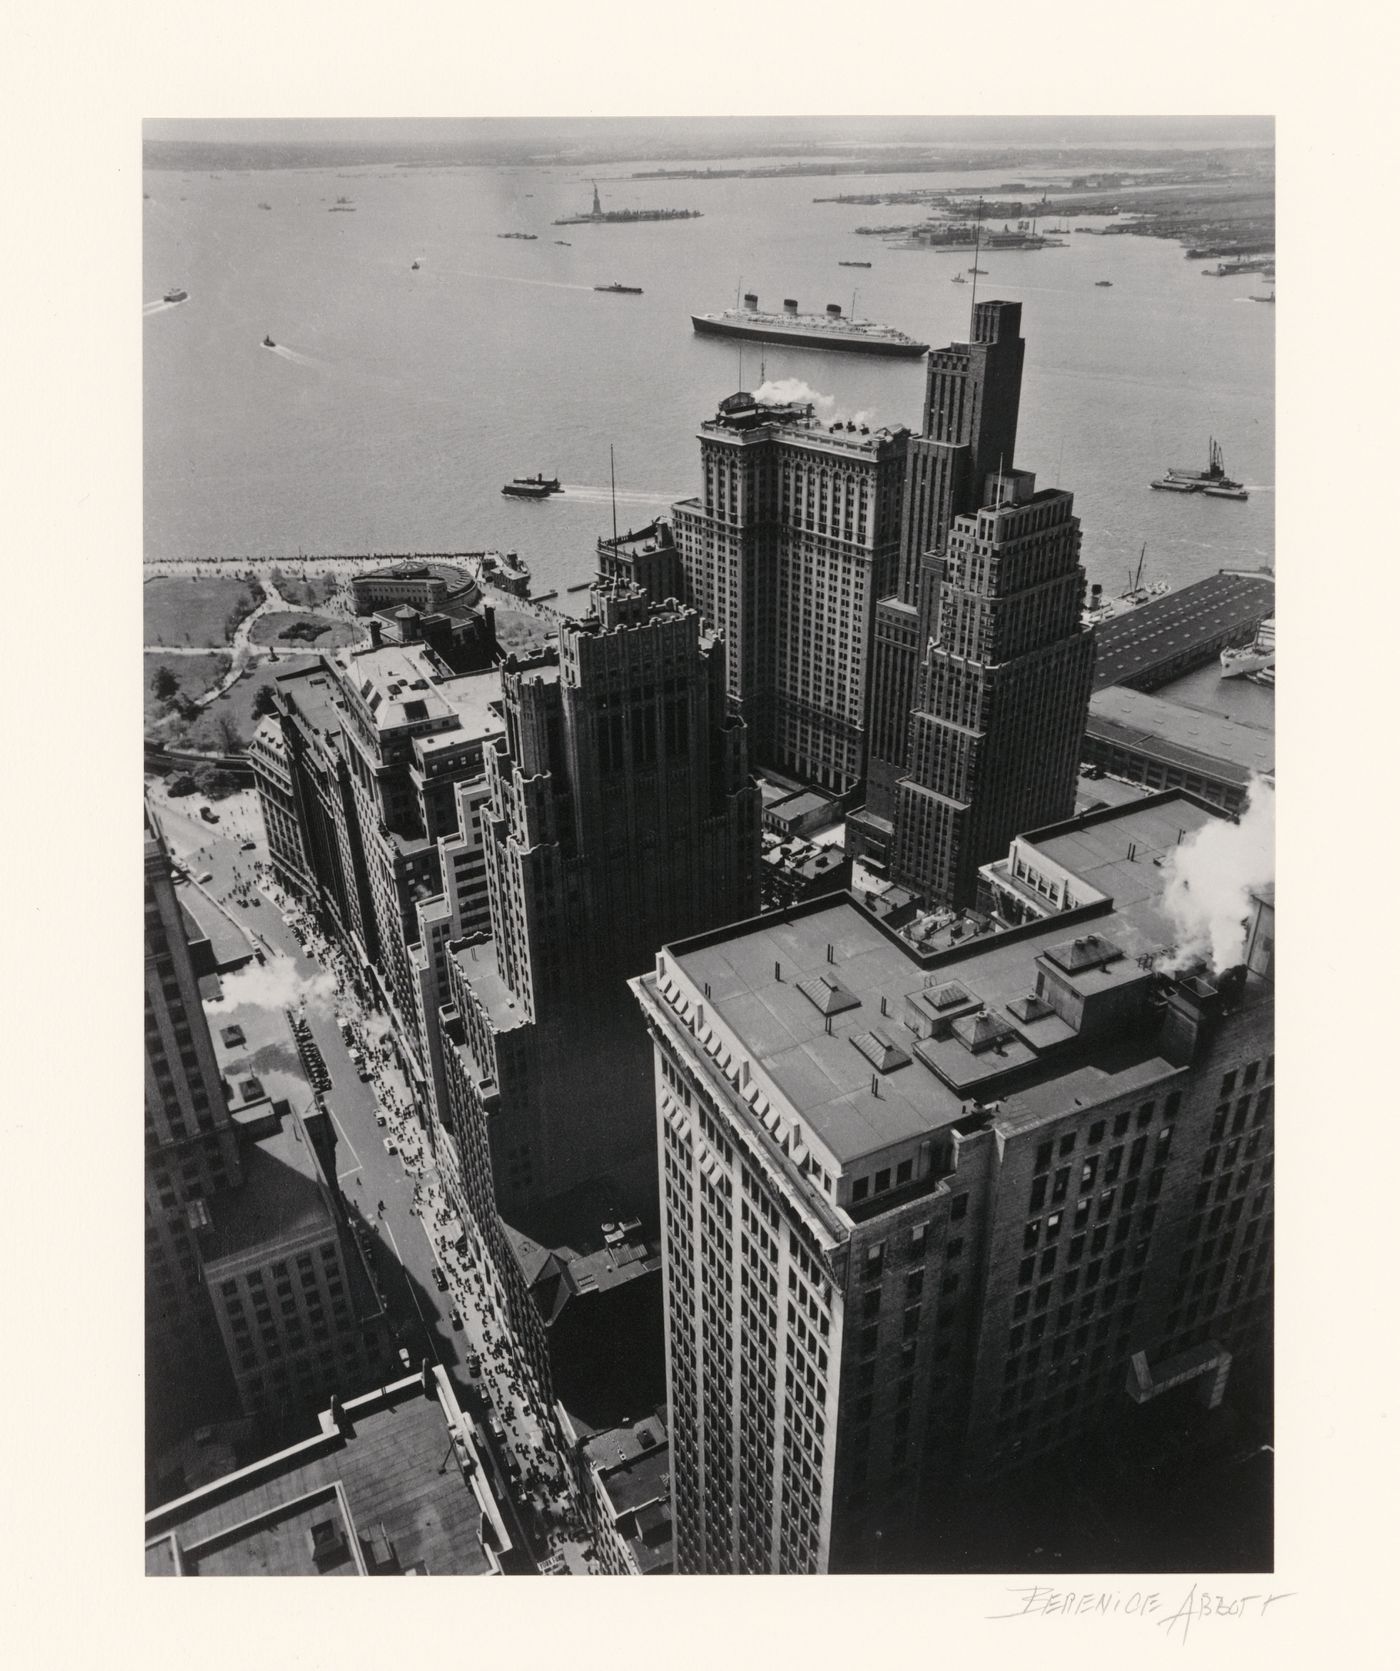 View of Broadway from the roof of the Irving Trust Company Building, showing the Adams Building, Fred C. French Building, Whitehall Building, and Downtown Athletic Club, New York City, New York